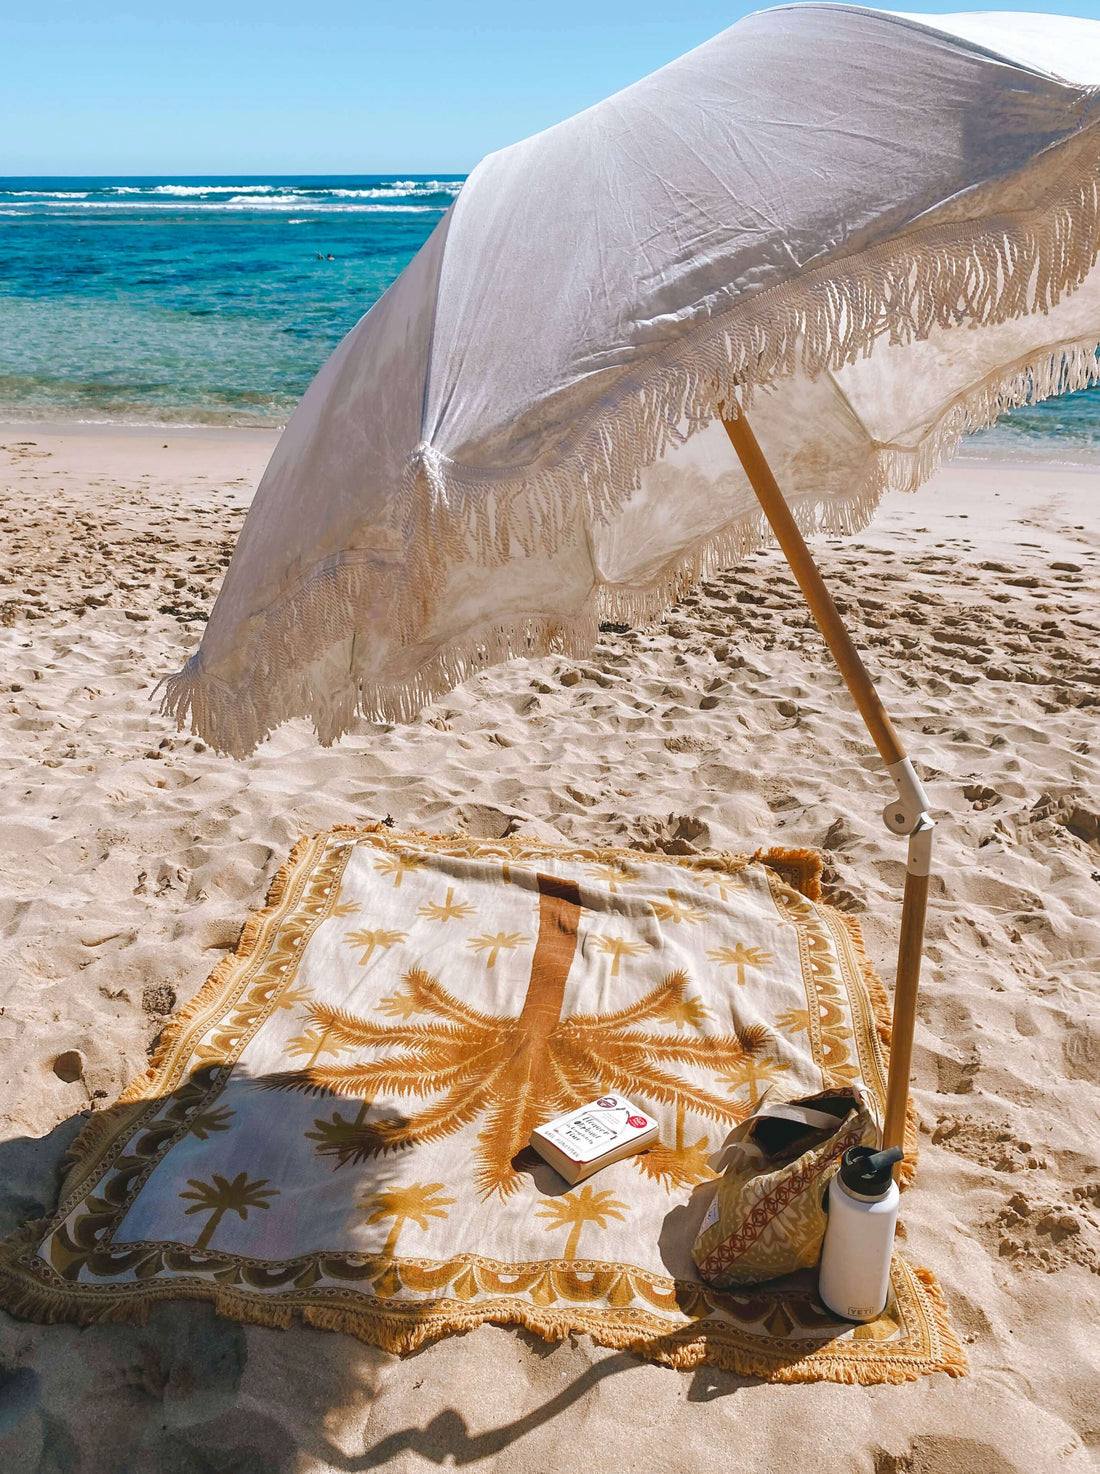 Endless Summer Palm Throw Blanket on the beach under a cream umbrella, clear blue ocean in the background. Ready for self-care - book and waterbottle on hand